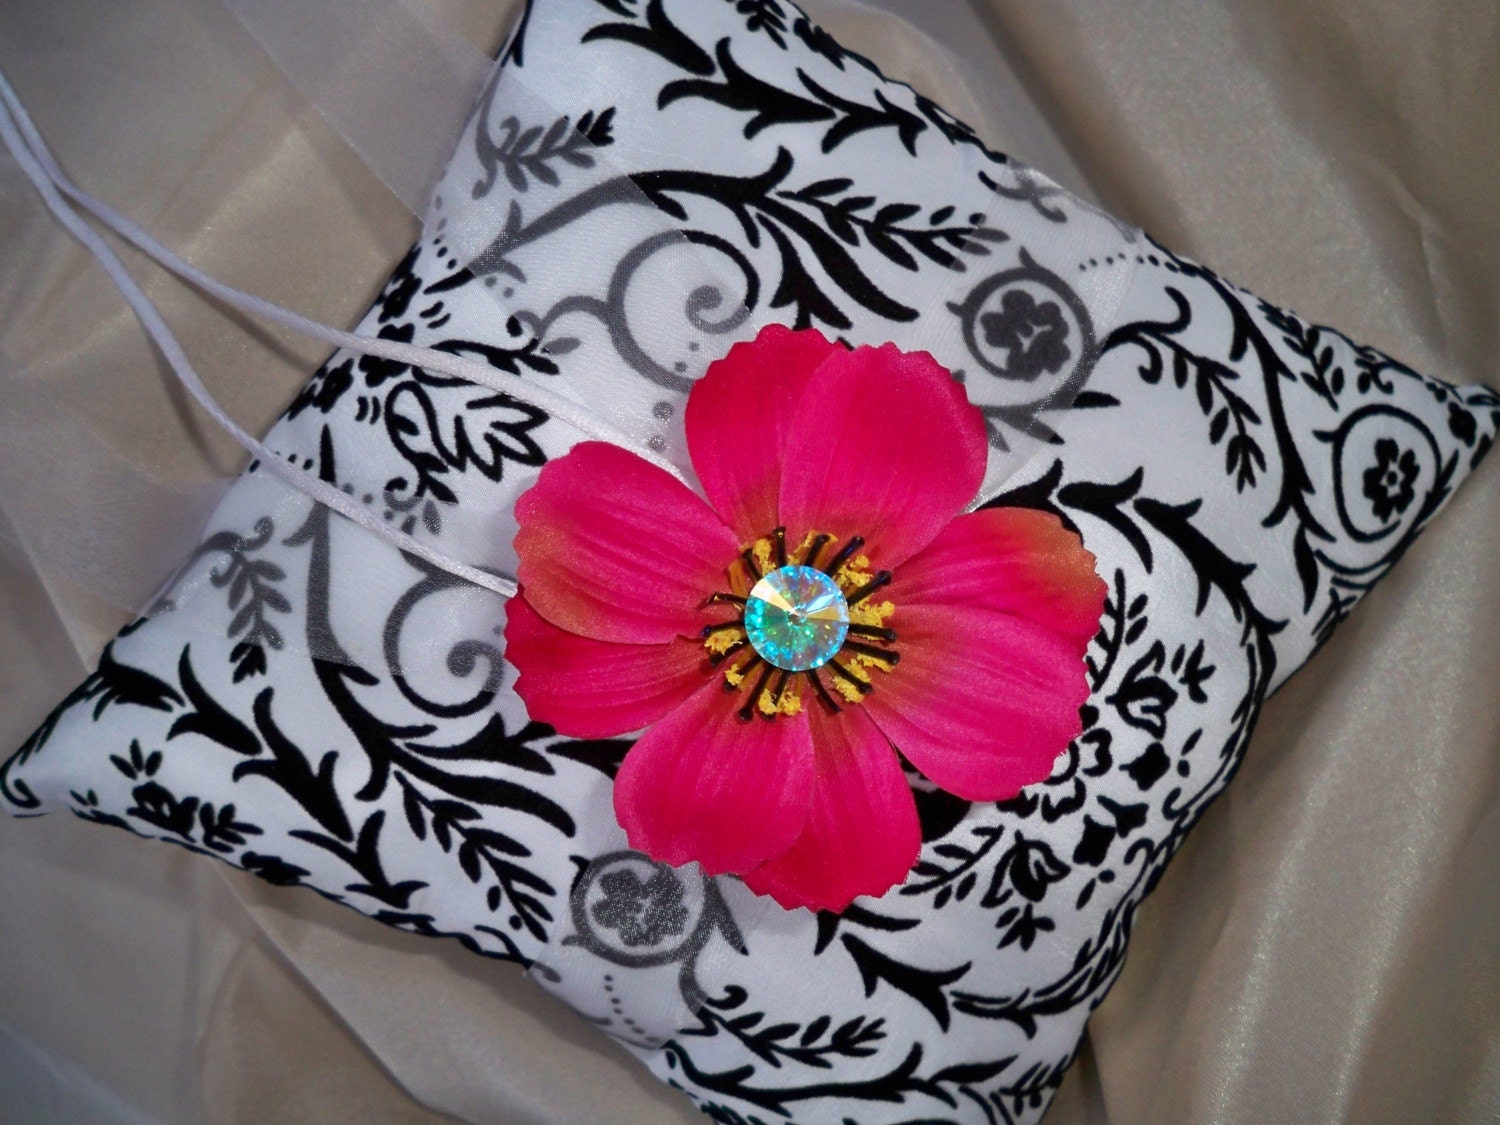 Damask White and Black Wedding Pillow With Hot Pink Cosmos Daisy